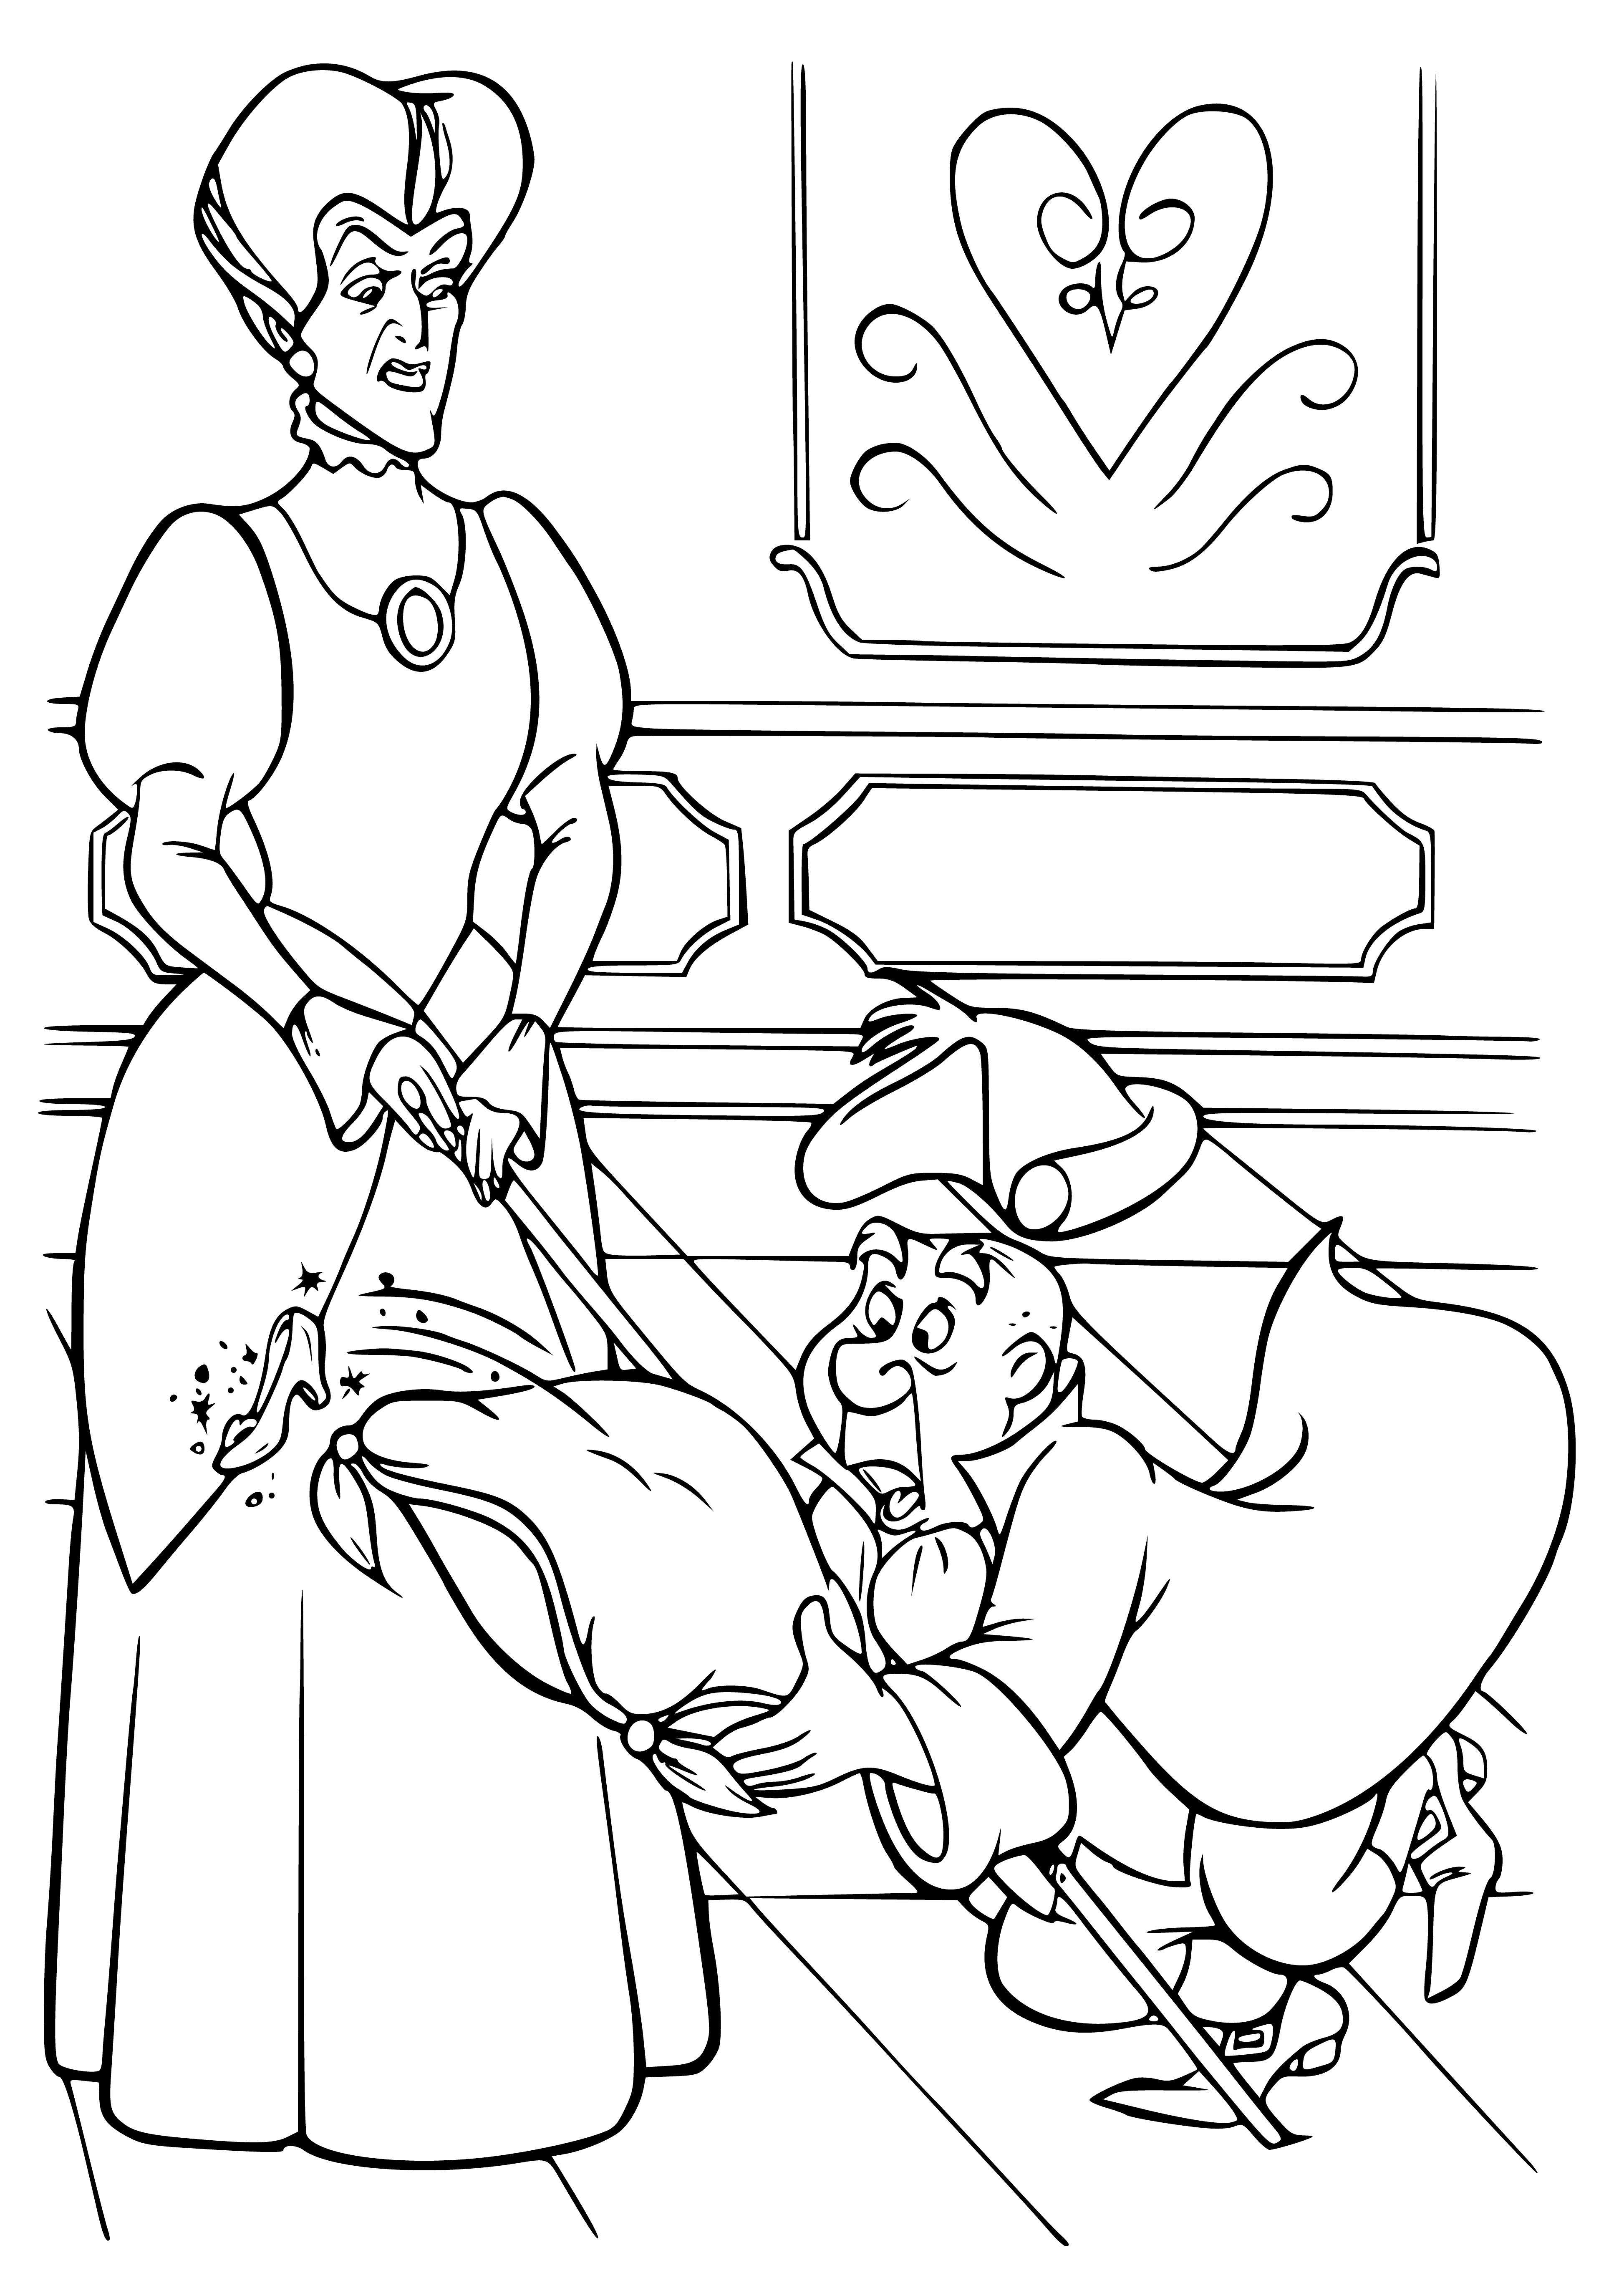 Footsteps of a servant coloring page